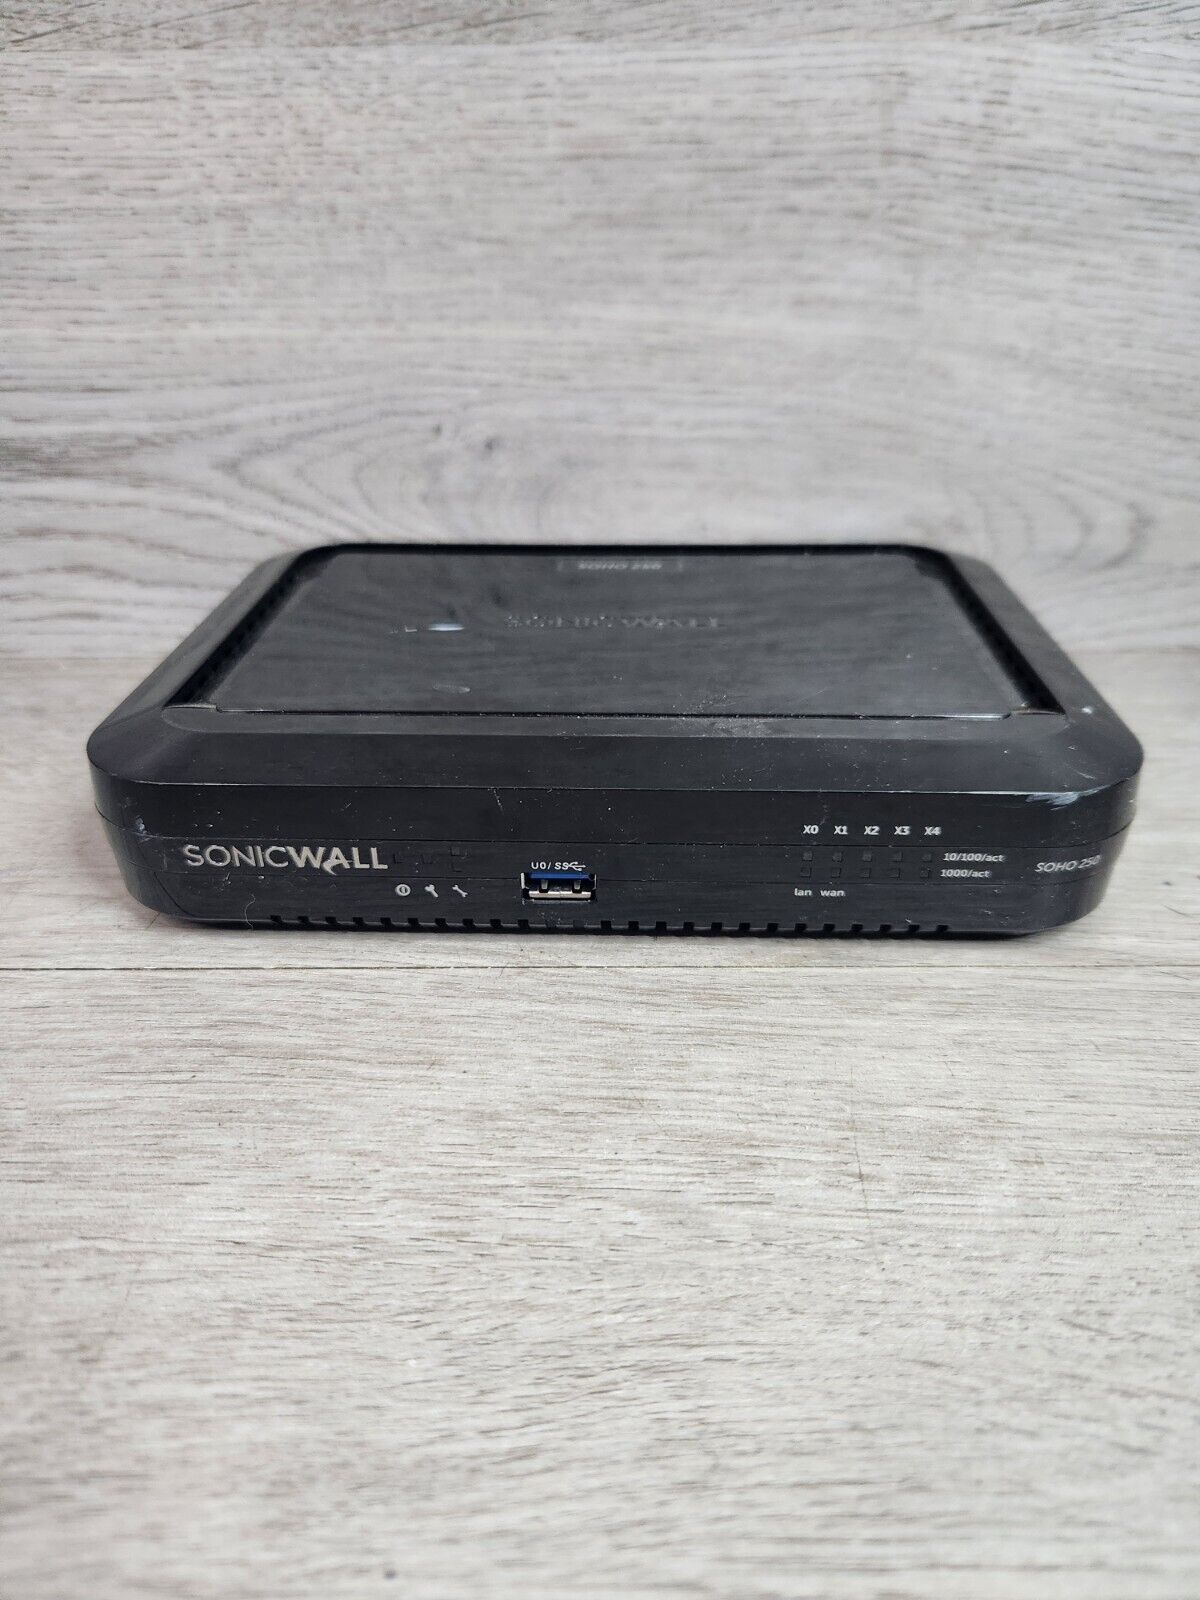 Dell Sonicwall SOHO 250 APL41-0D6 Firewall Network Security NO ADAPTER 